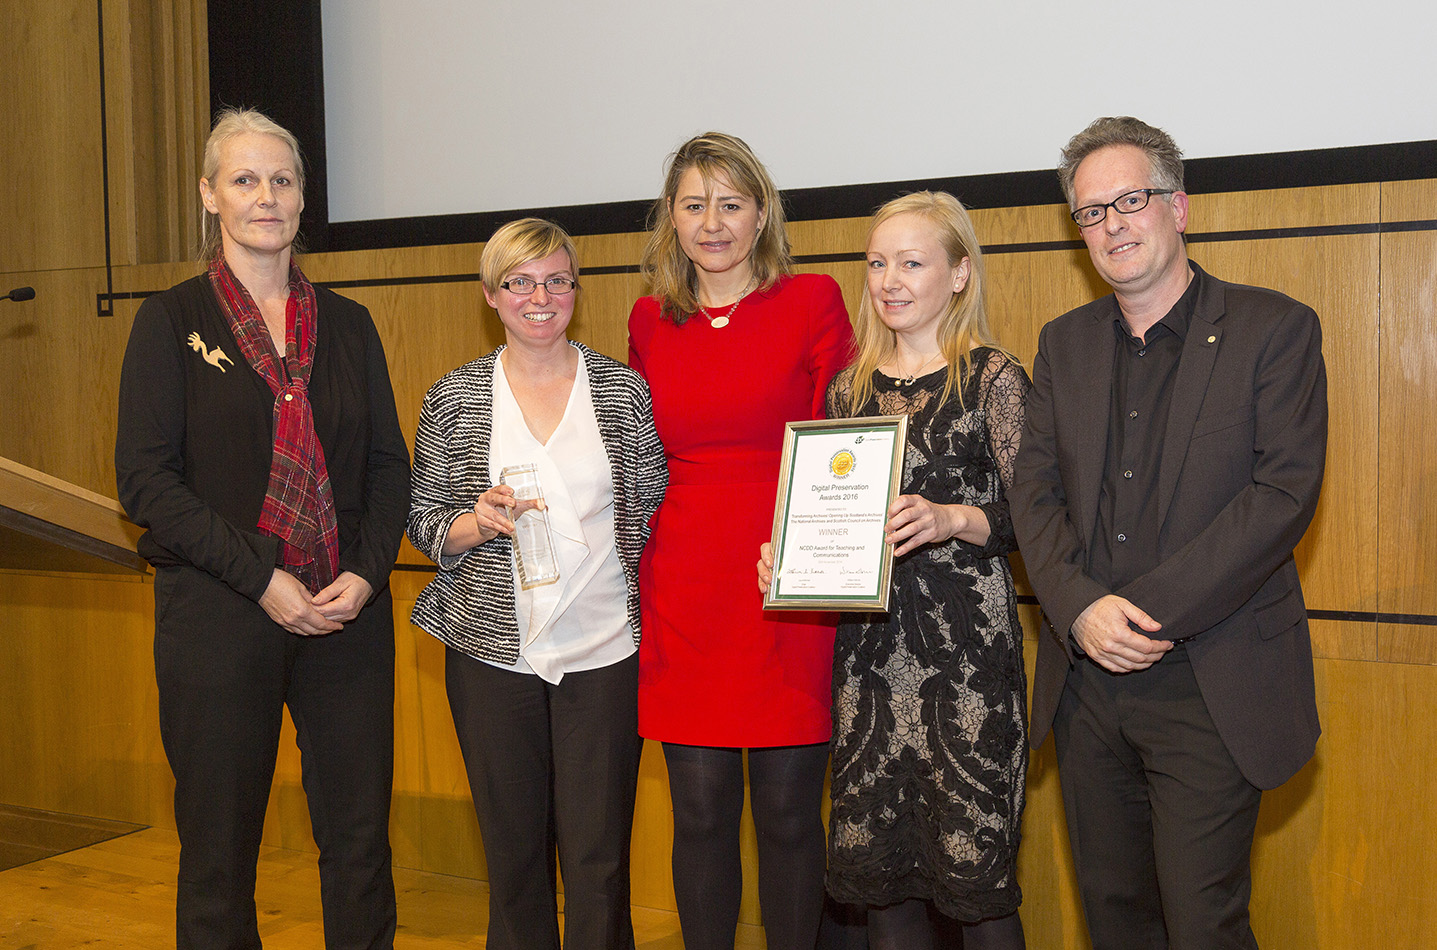 Marcel Ras of the NCDD and Margriet van Gorsel of the Dutch National Archives present Emma Stagg (The National Archives), Audrey Wilson and Victoria Brown (both Scottish Council on Archives) with the Award for Teaching and Communications, for their joint project ‘Transforming Archives/Opening up Scotland’s Archives’